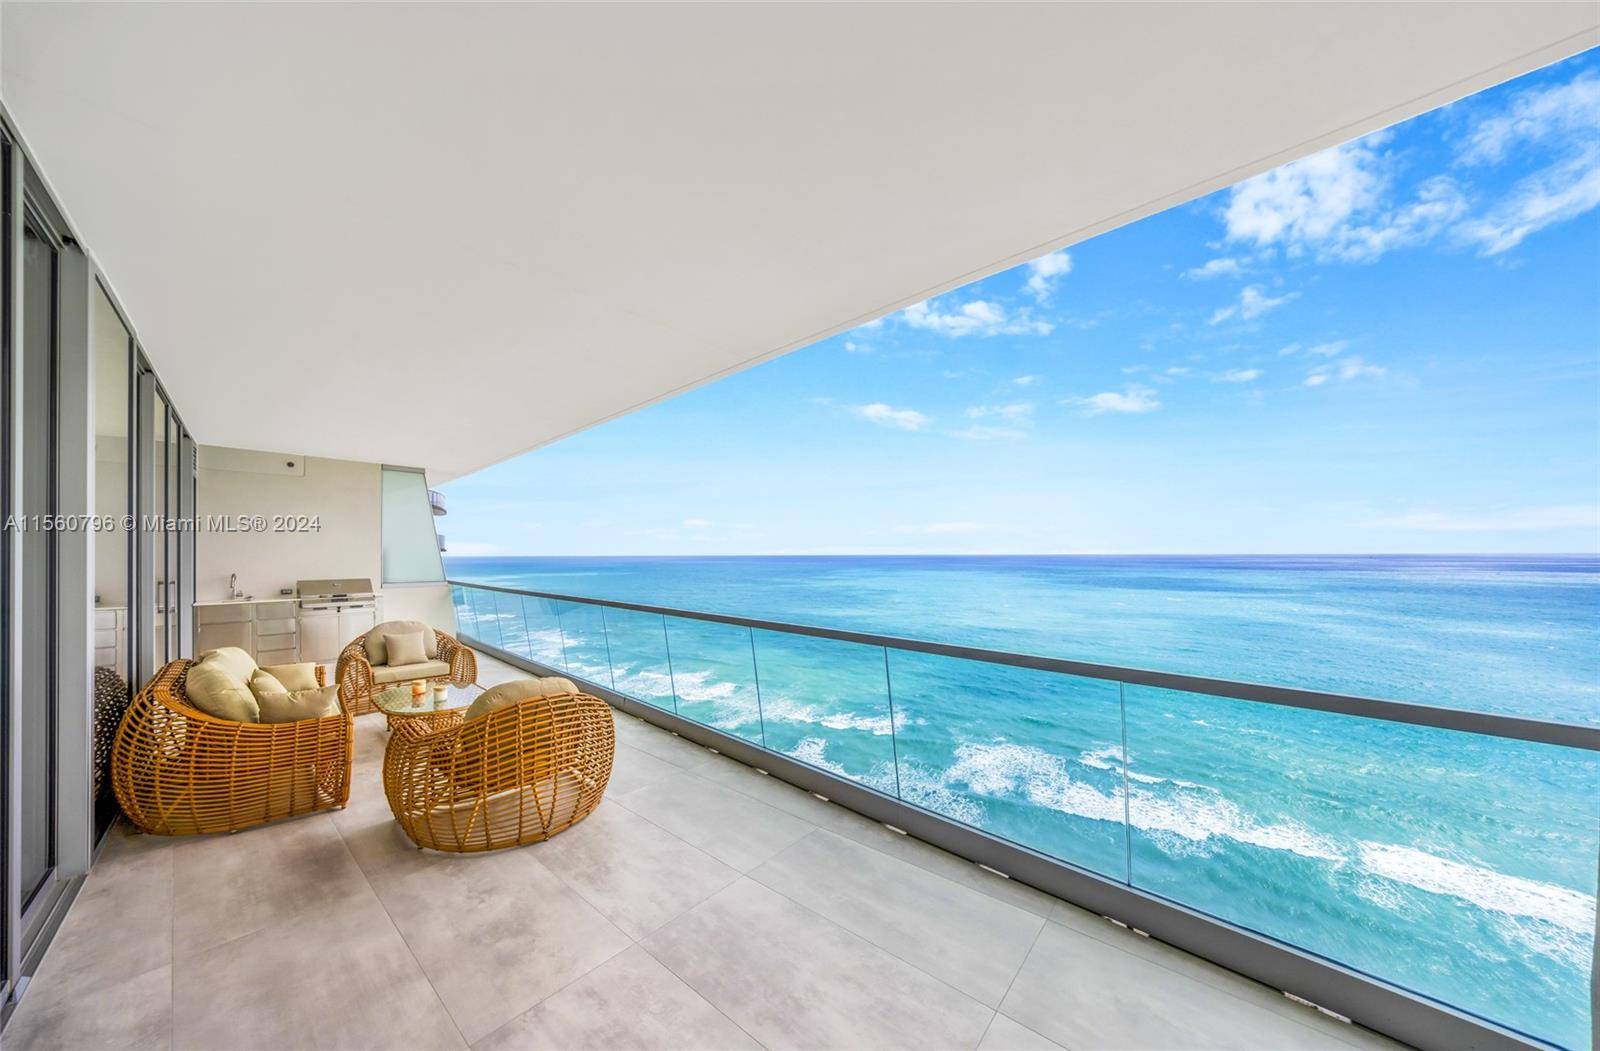 Welcome to Turnberry, one of the most prestigious buildings in Sunny Isles Beach, offering unparalleled luxury and amenities.